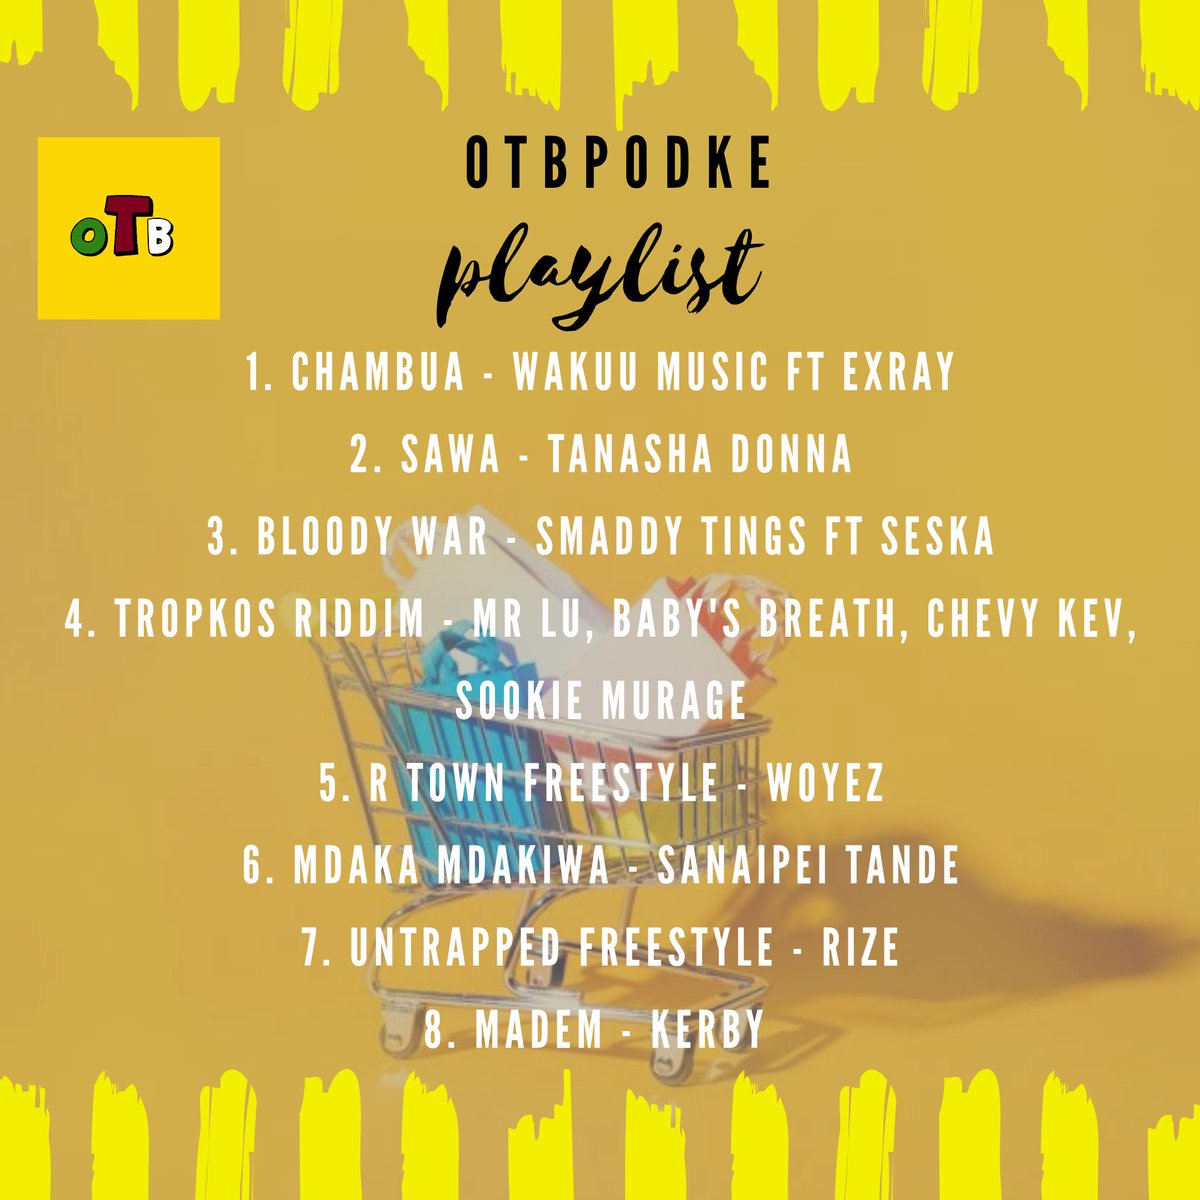 Playlist for this episode is a mix of Gengetone, RnB and Nu Nairobi. Featured artists include - Seska , @WakuuMusic, @XPR500, @Sanaipei_Tande, @SookieMurage, @woyez1534 and more.

Listen using #linktree in bio and above. #otbpodke #playkemusic